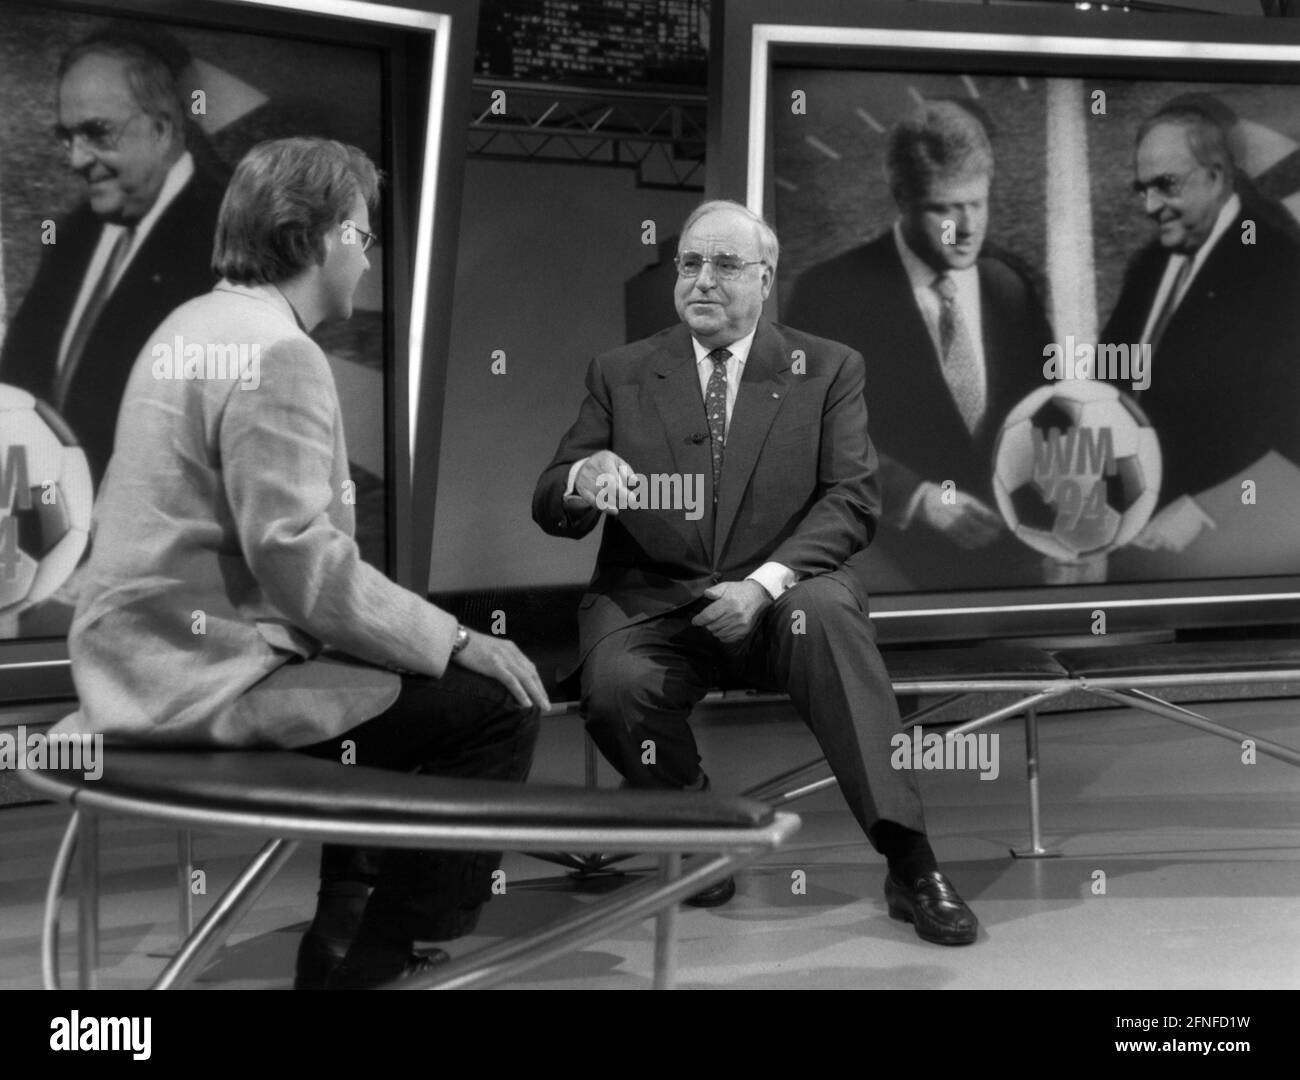 'Sat 1 sports boss Reinhold Beckmann (left) receives German Chancellor Helmut Kohl in an edition of ''ranissimo'' to talk about his enthusiasm for soccer. [automated translation]' Stock Photo